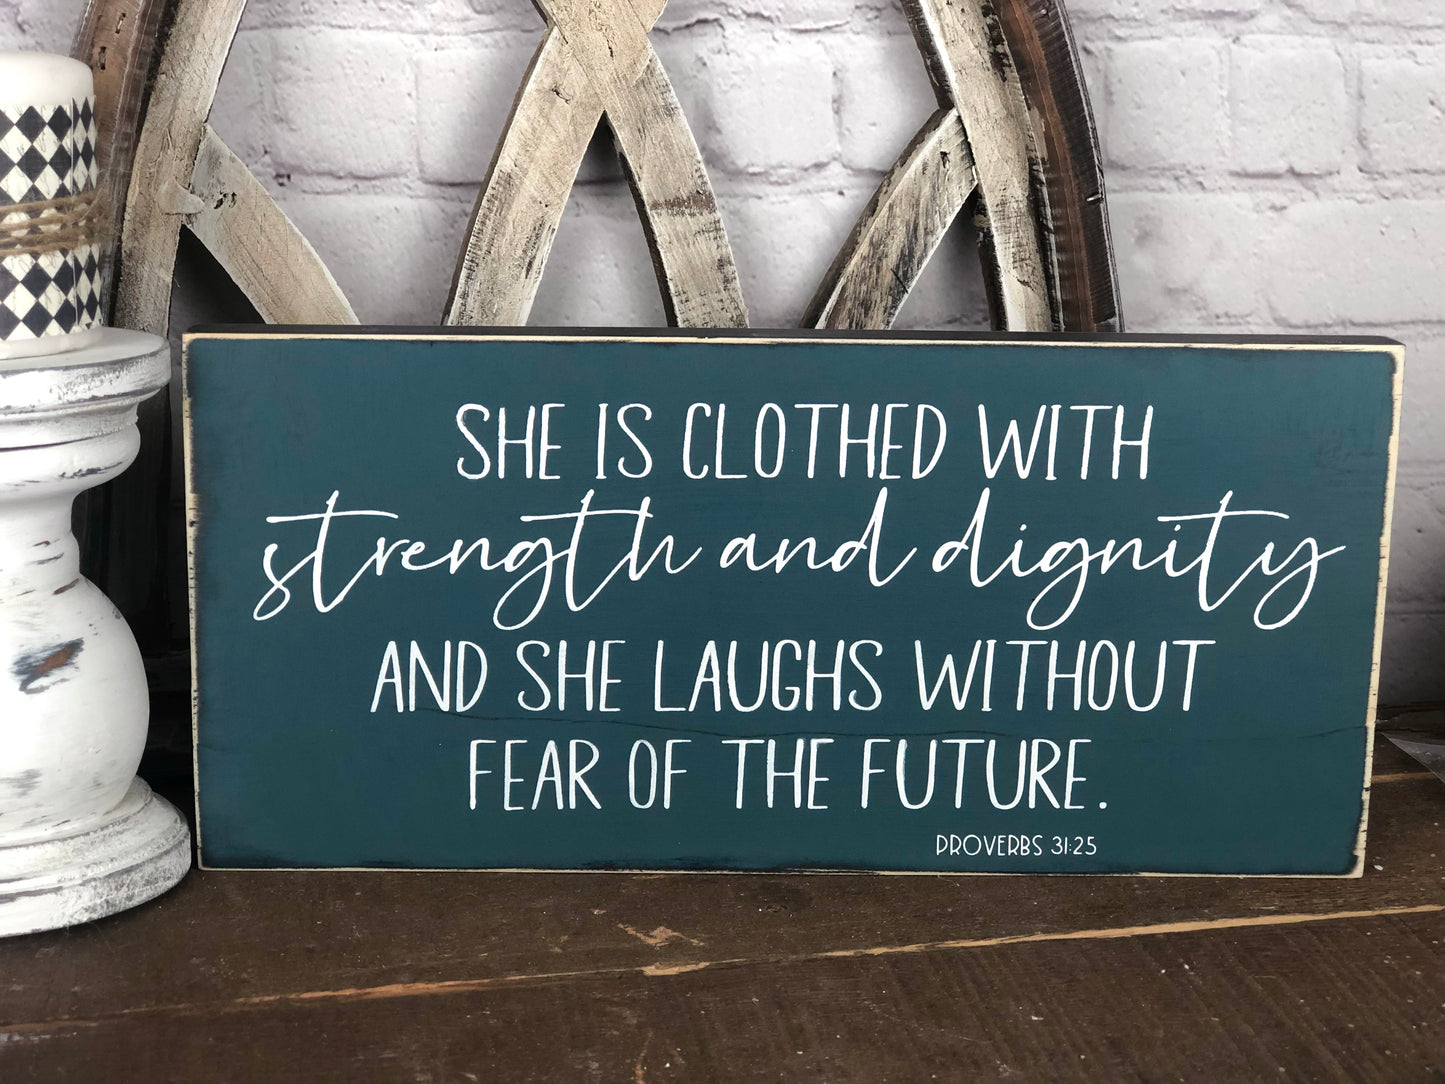 SHE IS CLOTHED WITH STRENGTH AND DIGNITY AND SHE LAUGHS WITHOUT FEAR OF THE FUTURE - WOOD SIGN